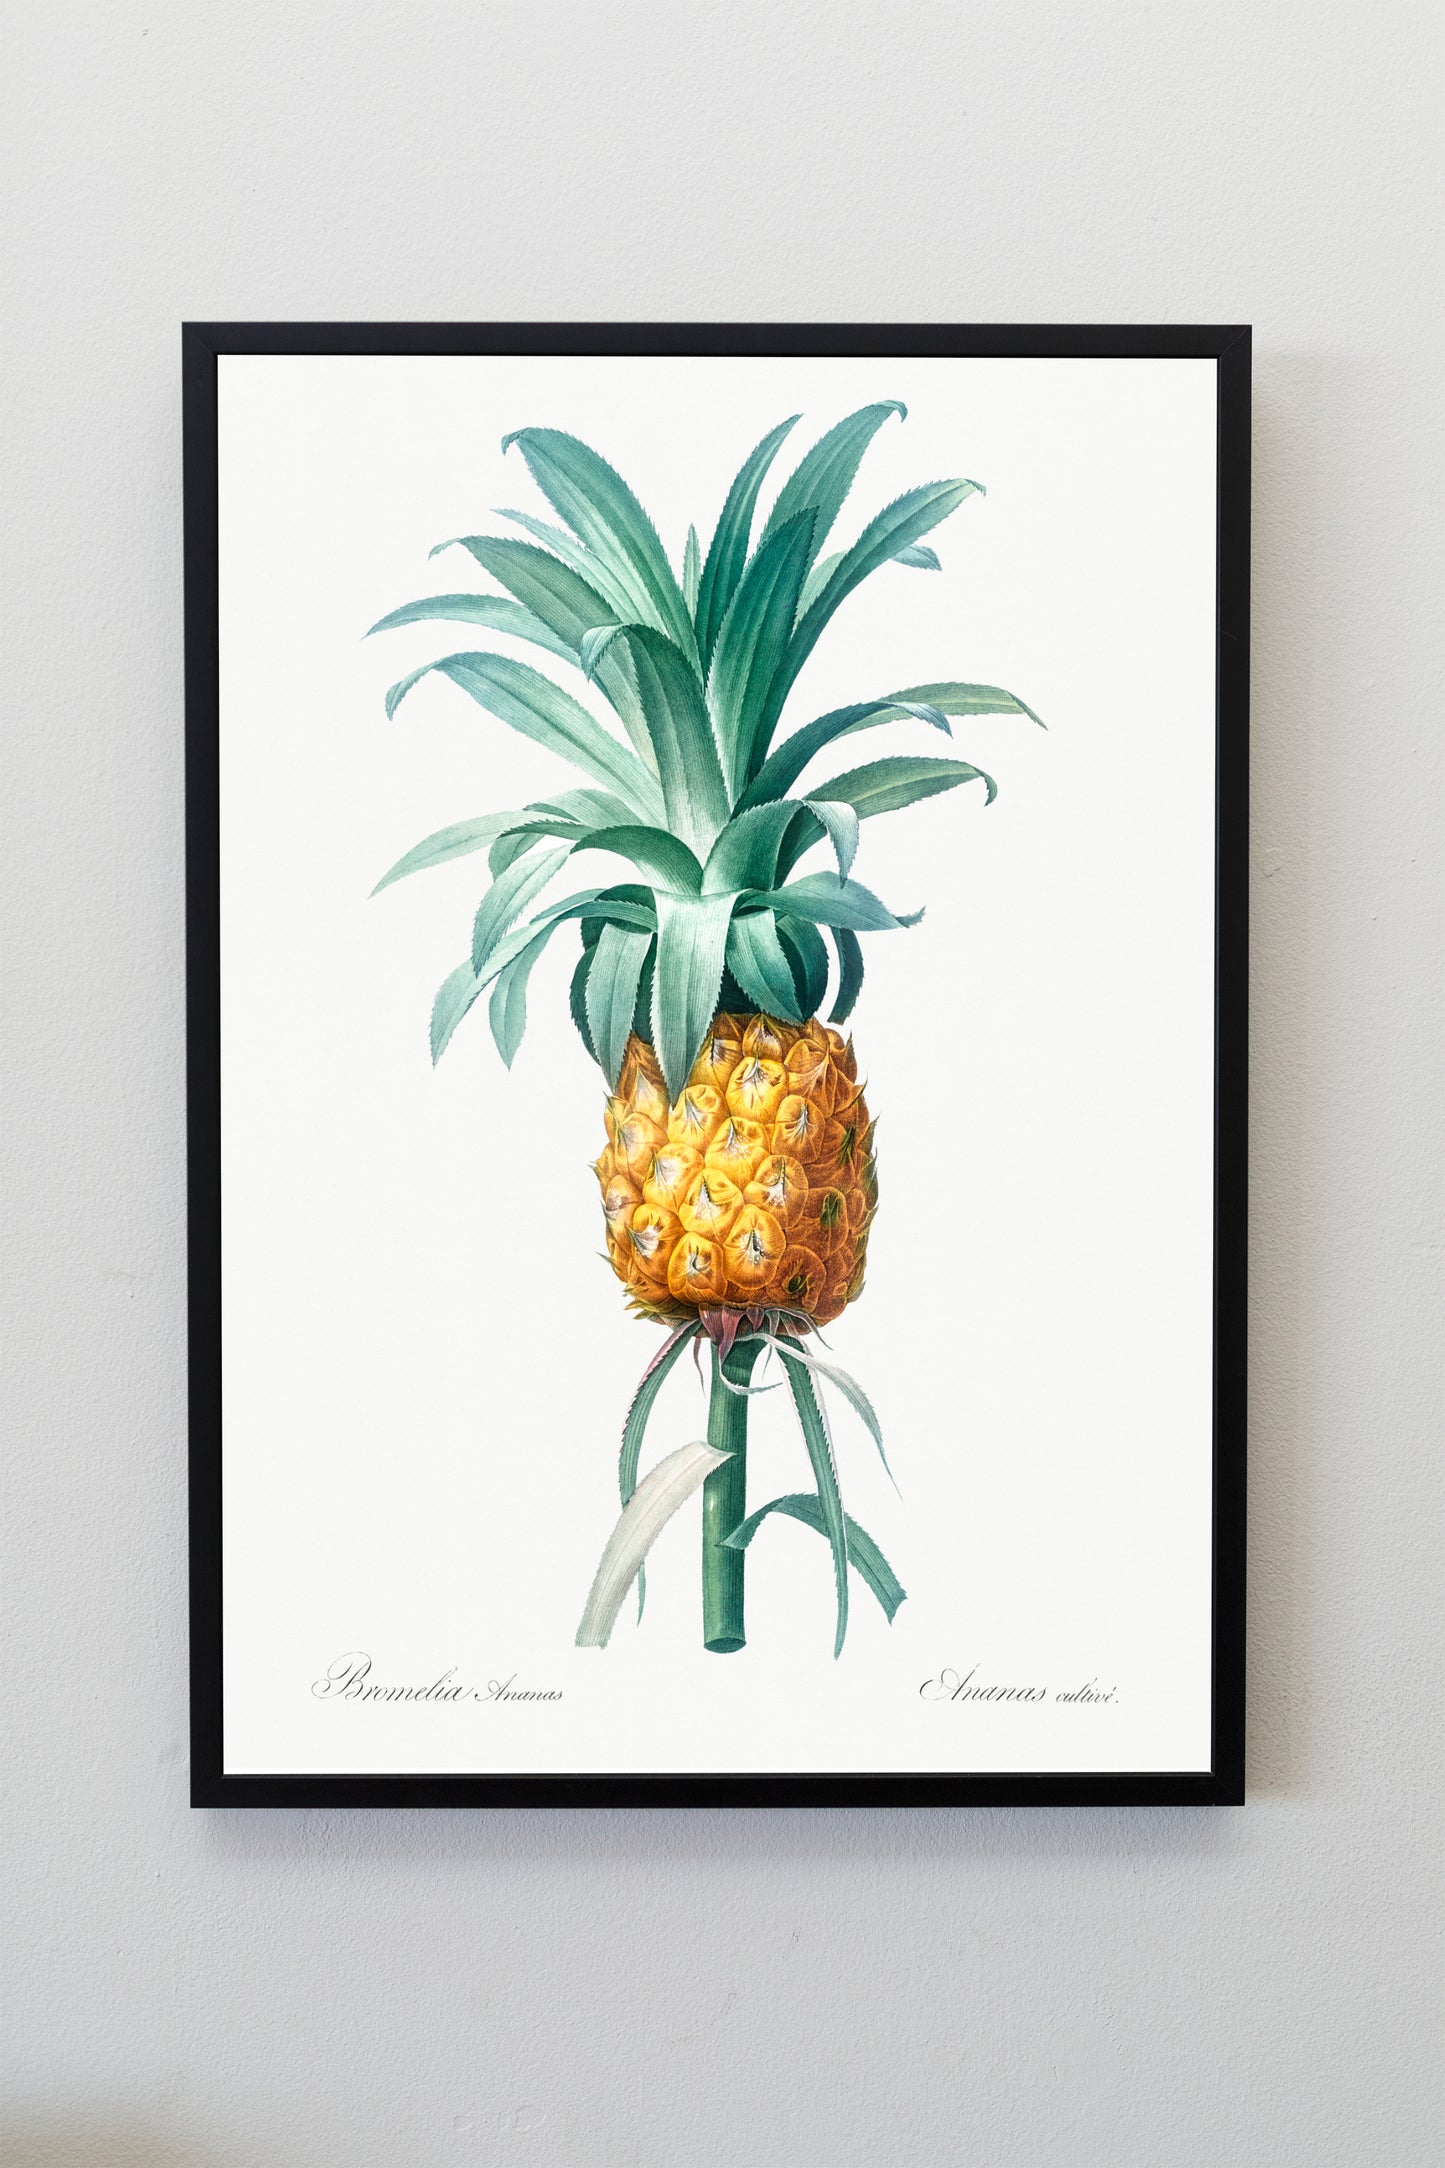 Pineapple illustration from Les liliacées (1805) by Pierre-Joseph Redouté Poster Print Wall Hanging Decor